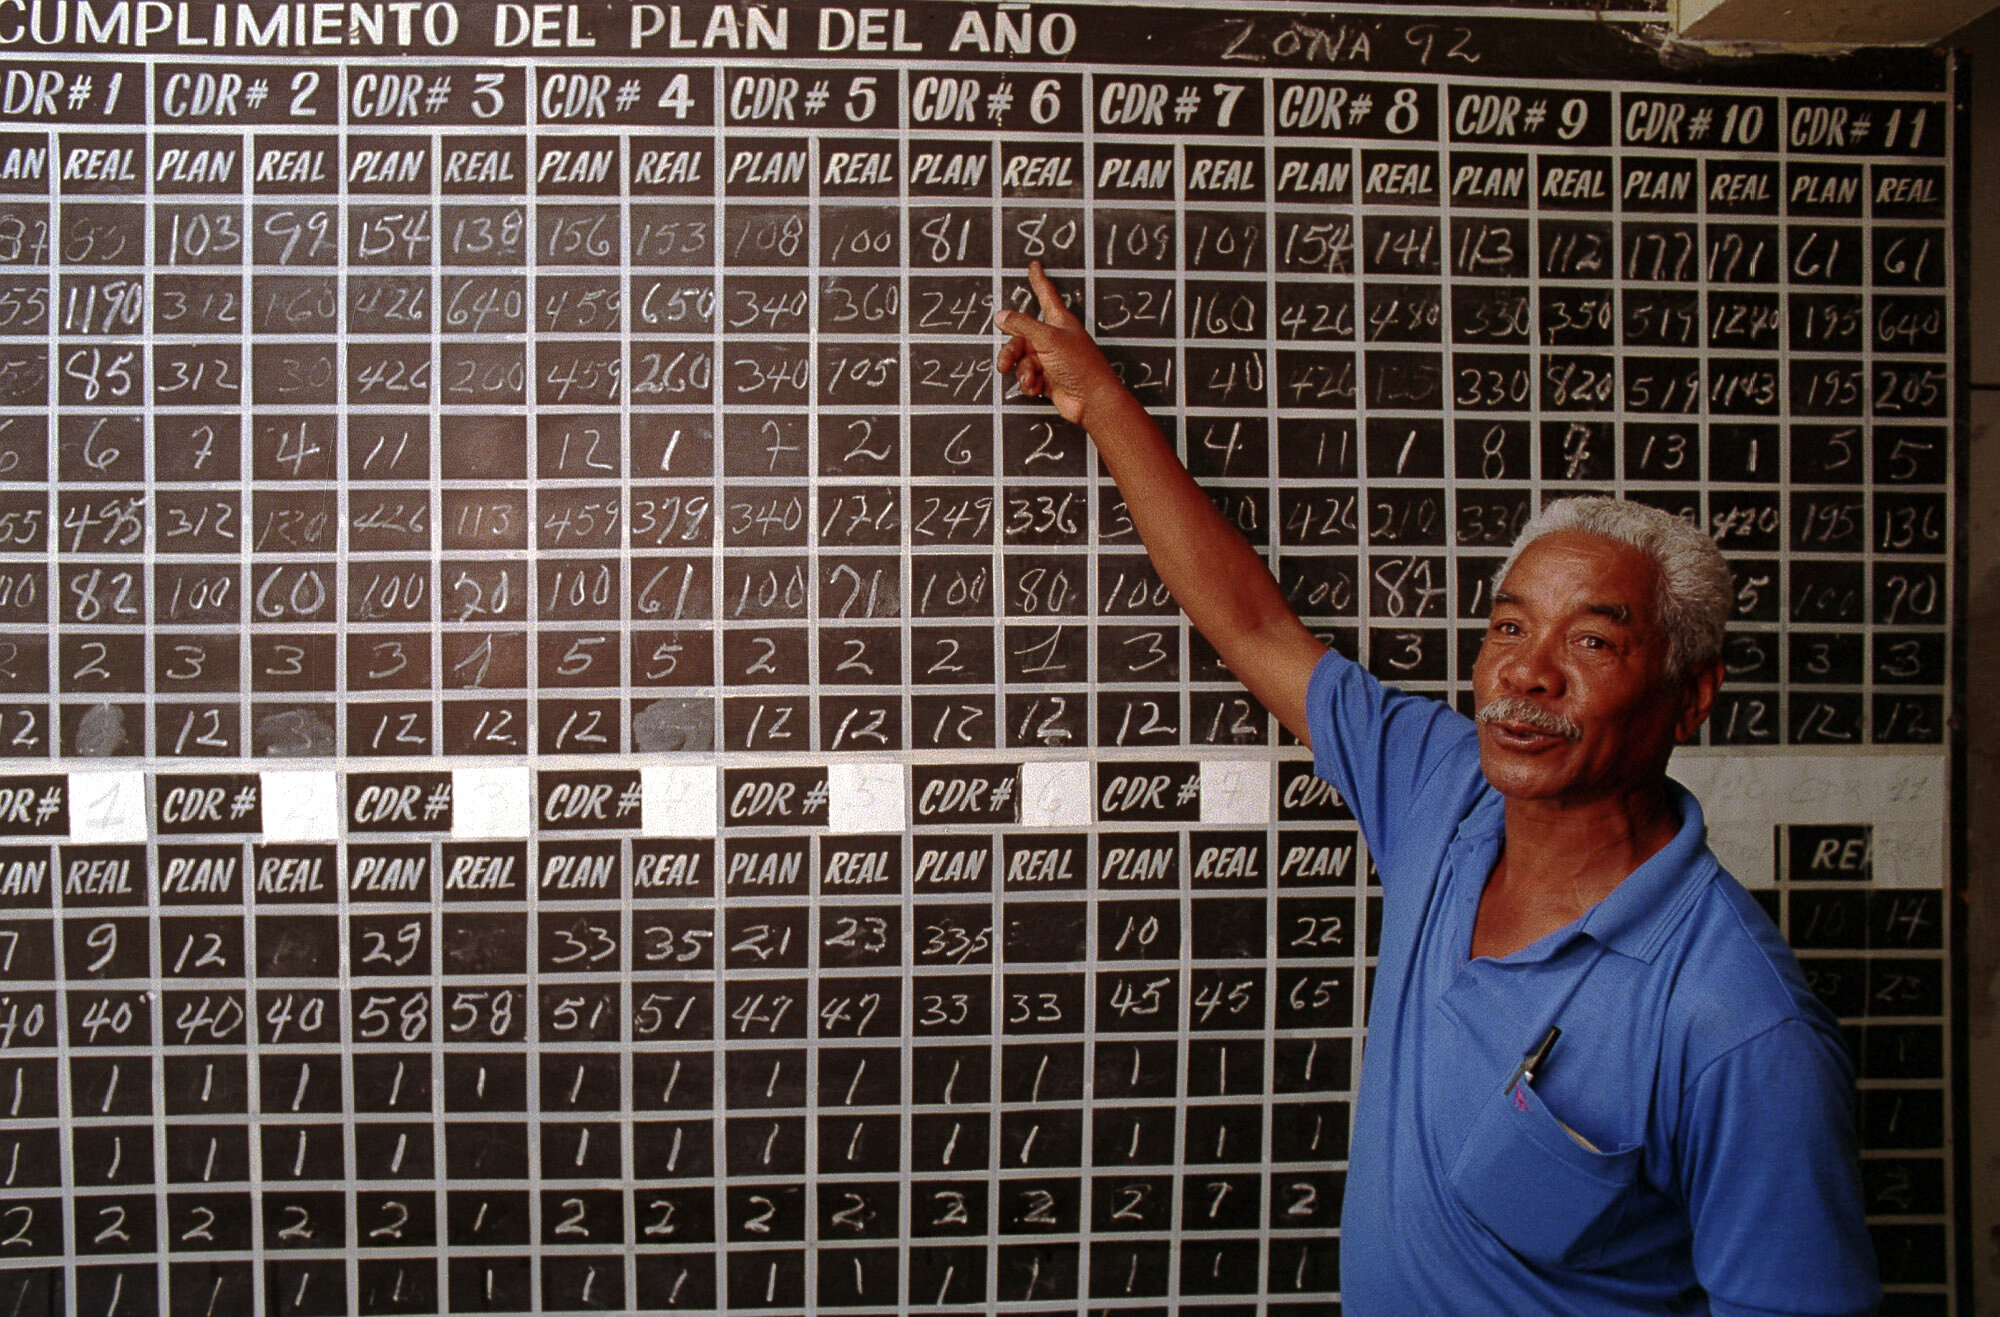  Victor Ricardo Cairo Saez, CDR Coordinator of the Zone 92, explains a board with plans set by the CDR. Havana, 1999.                  